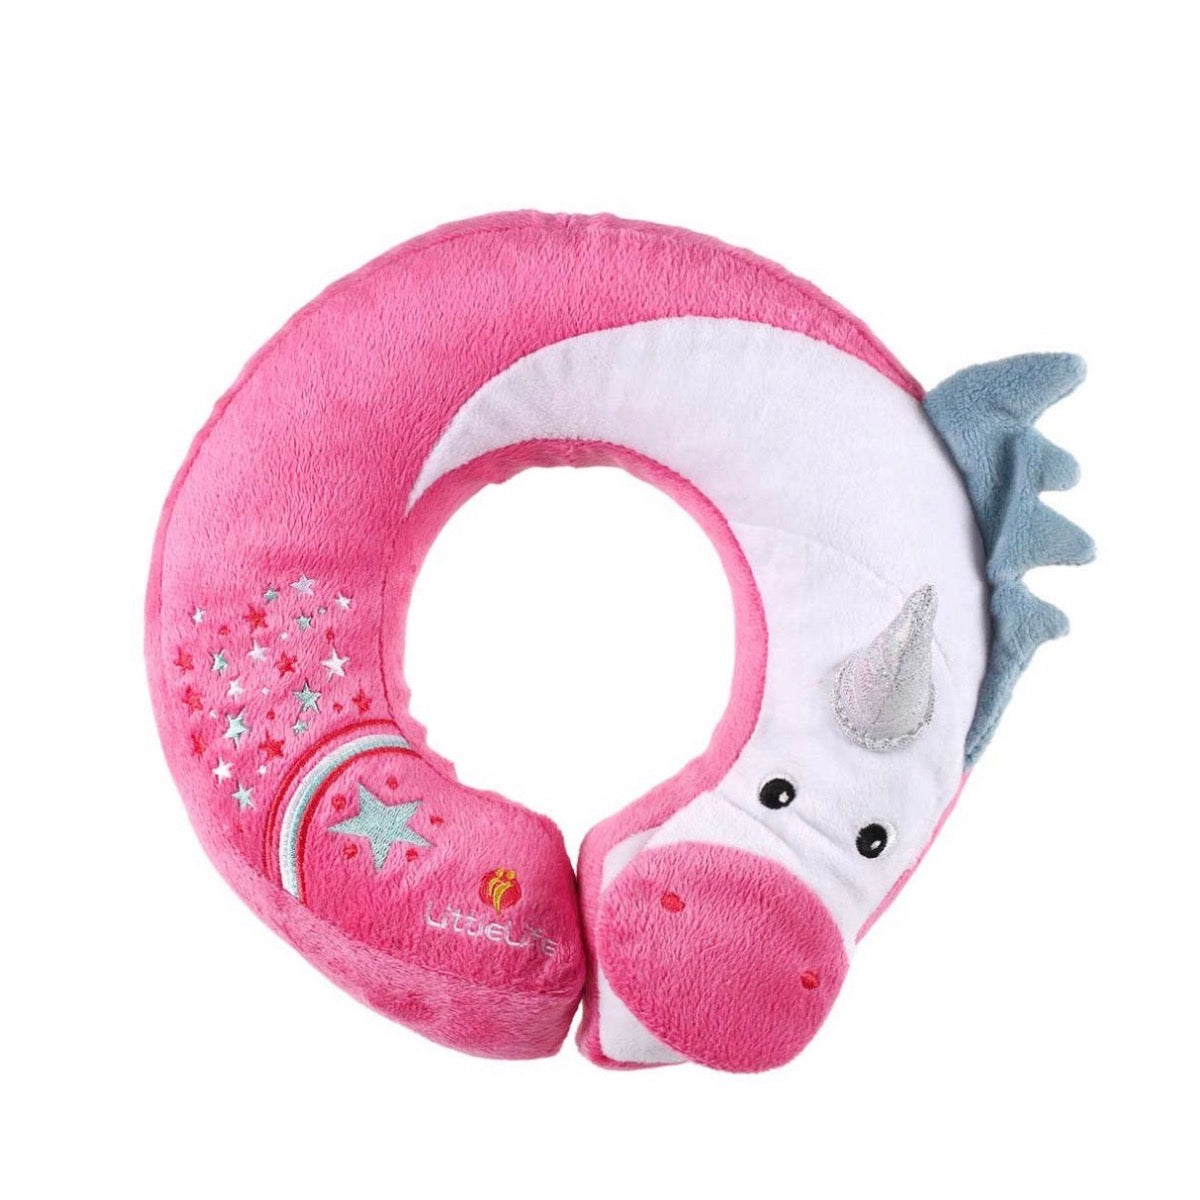 Littlelife Unicorn Travel Pillow L12913 Accessories ONE SIZE / Pink